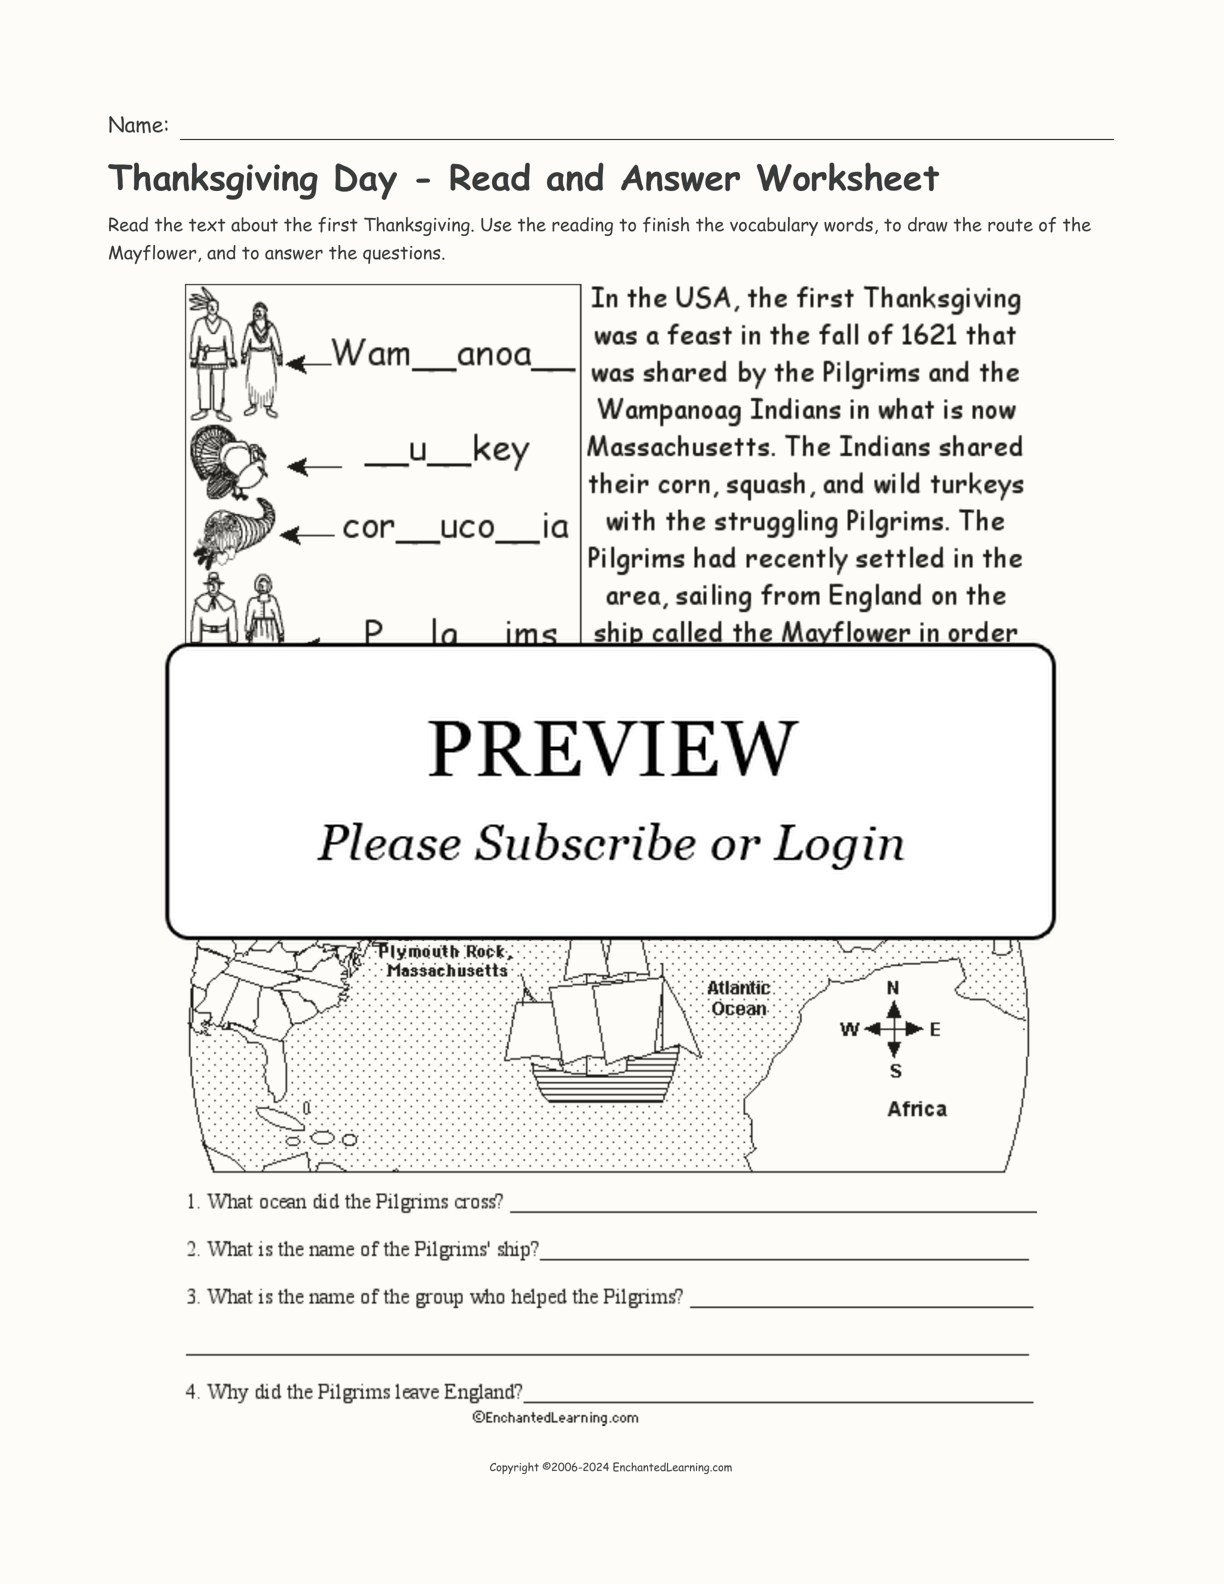 Thanksgiving Day - Read and Answer Worksheet interactive worksheet page 1